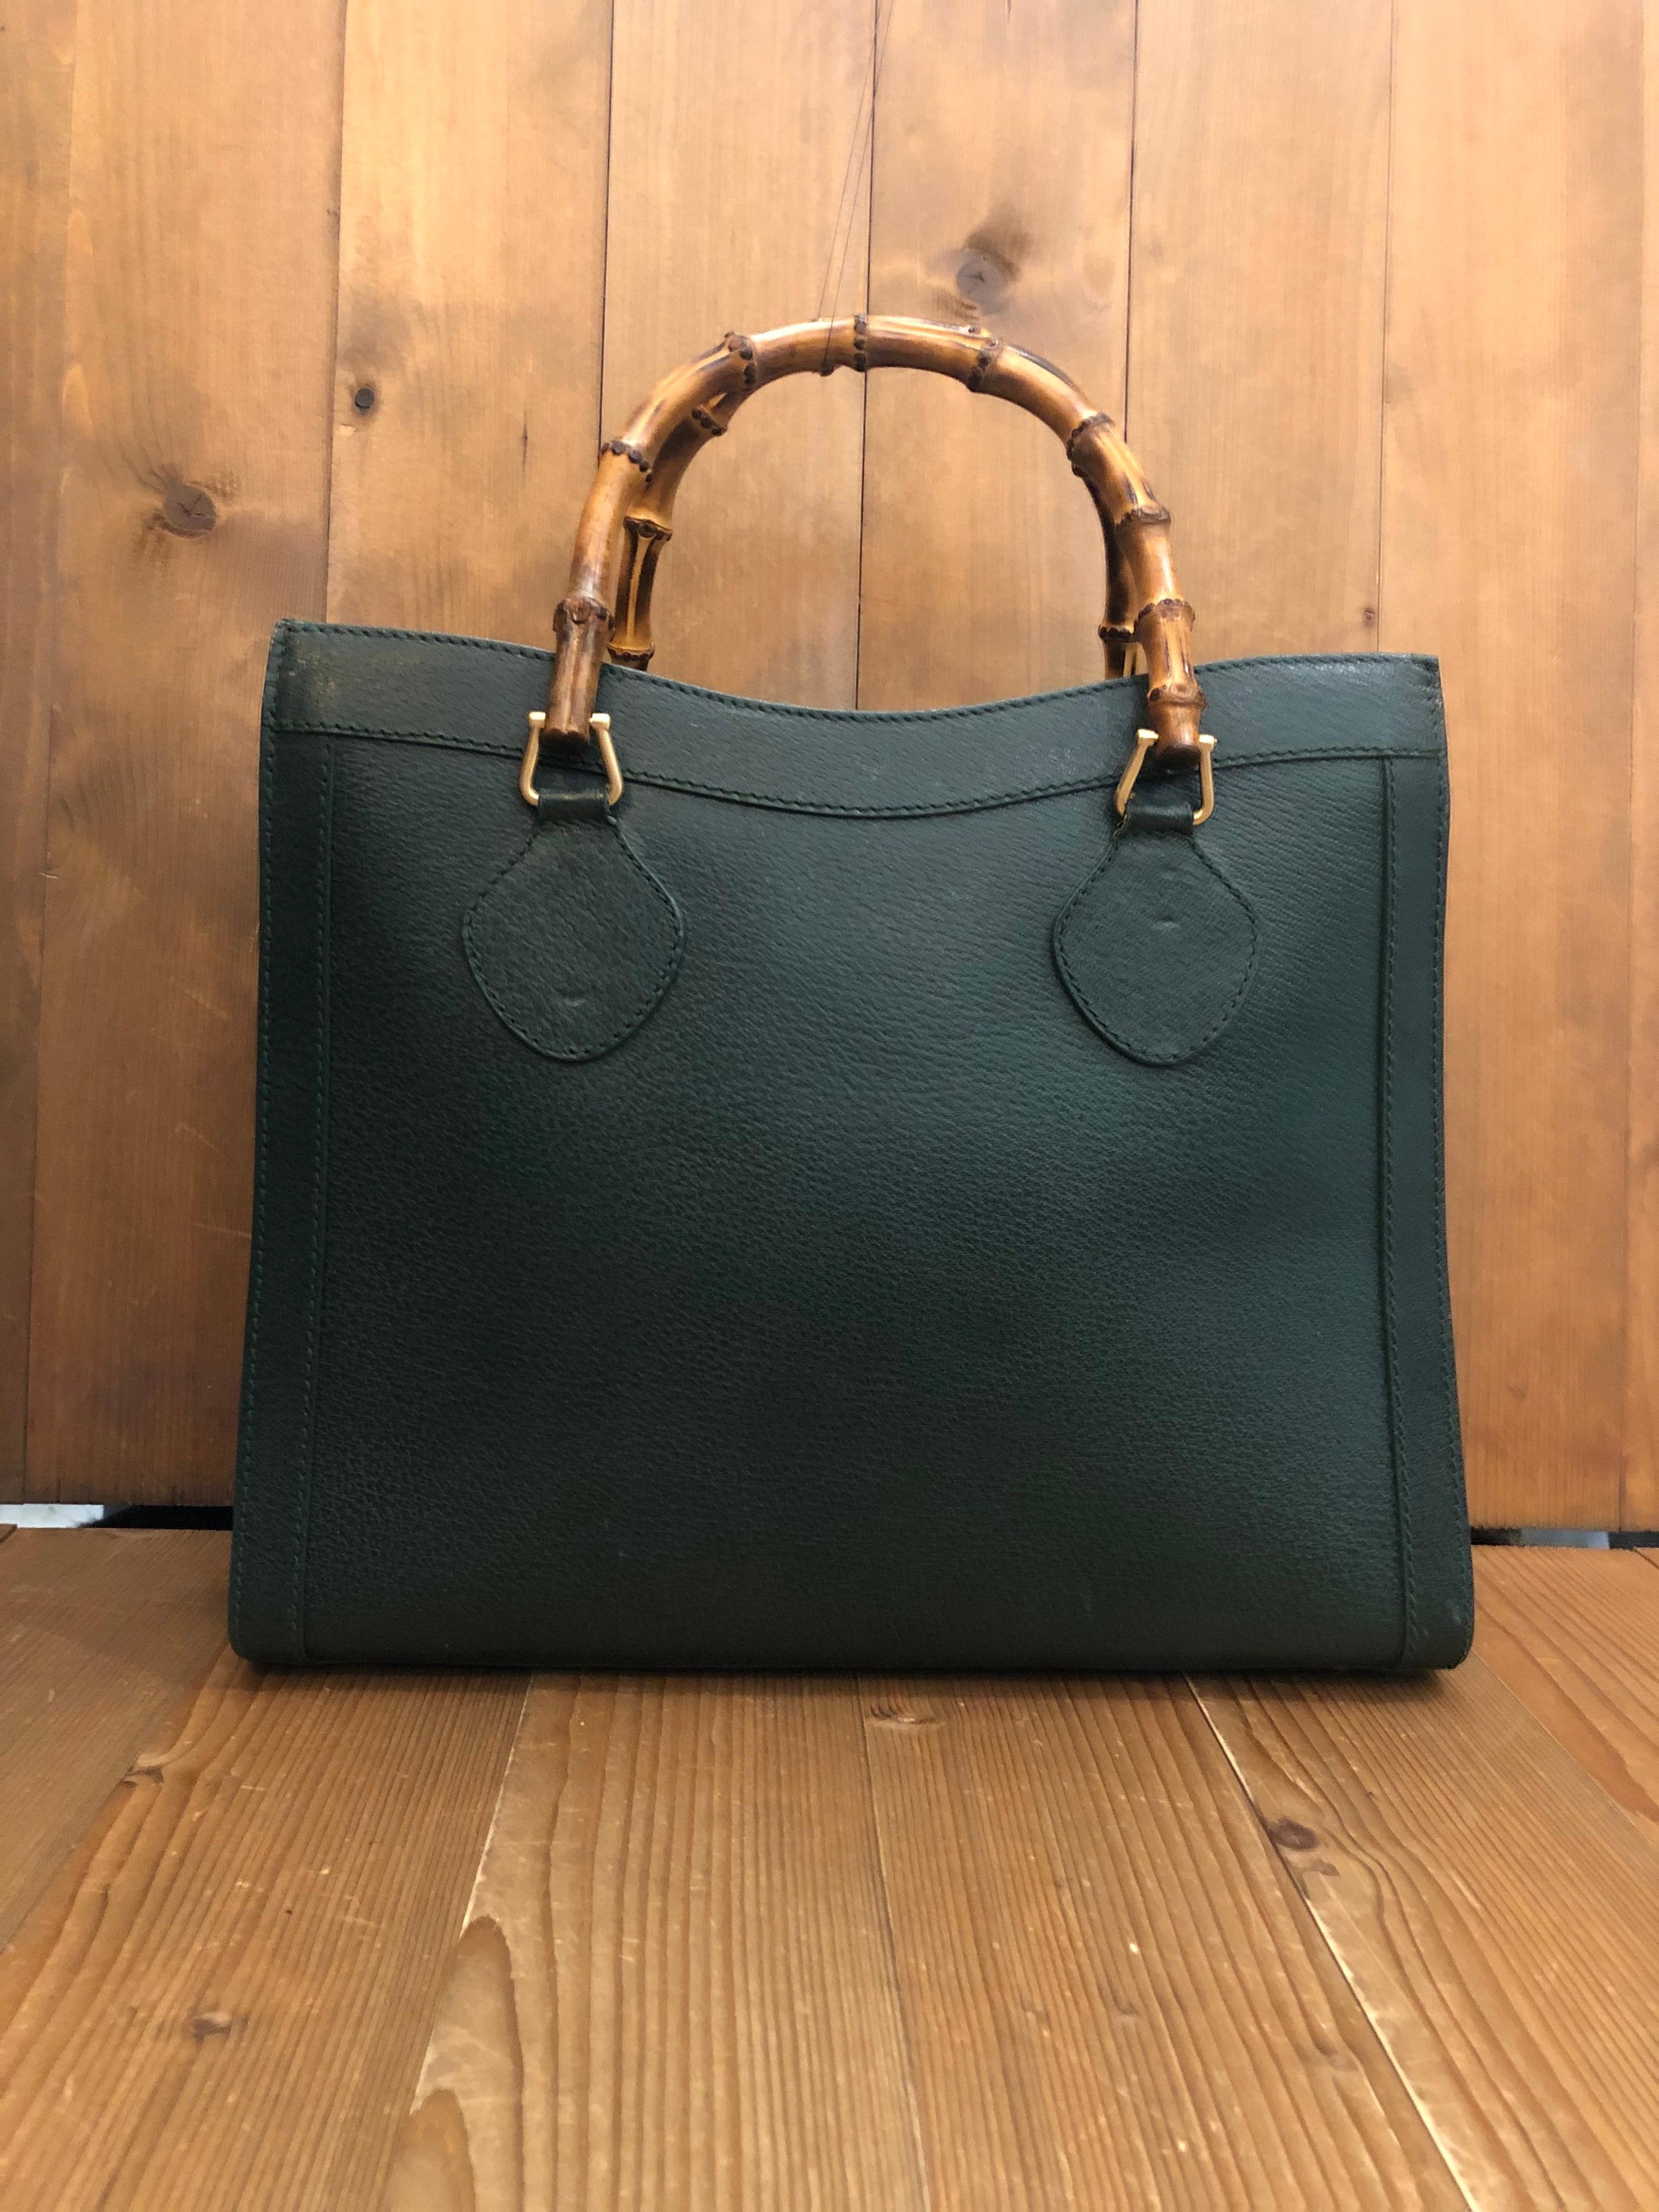 1990s Gucci bamboo tote in a unique and rare dark green color. The Bamboo tote is one of Princess Diana's favorite purses. Interior fully refurbished. Gucci revamped this Bamboo tote in 2021 winter collection. 

Material: Pigskin